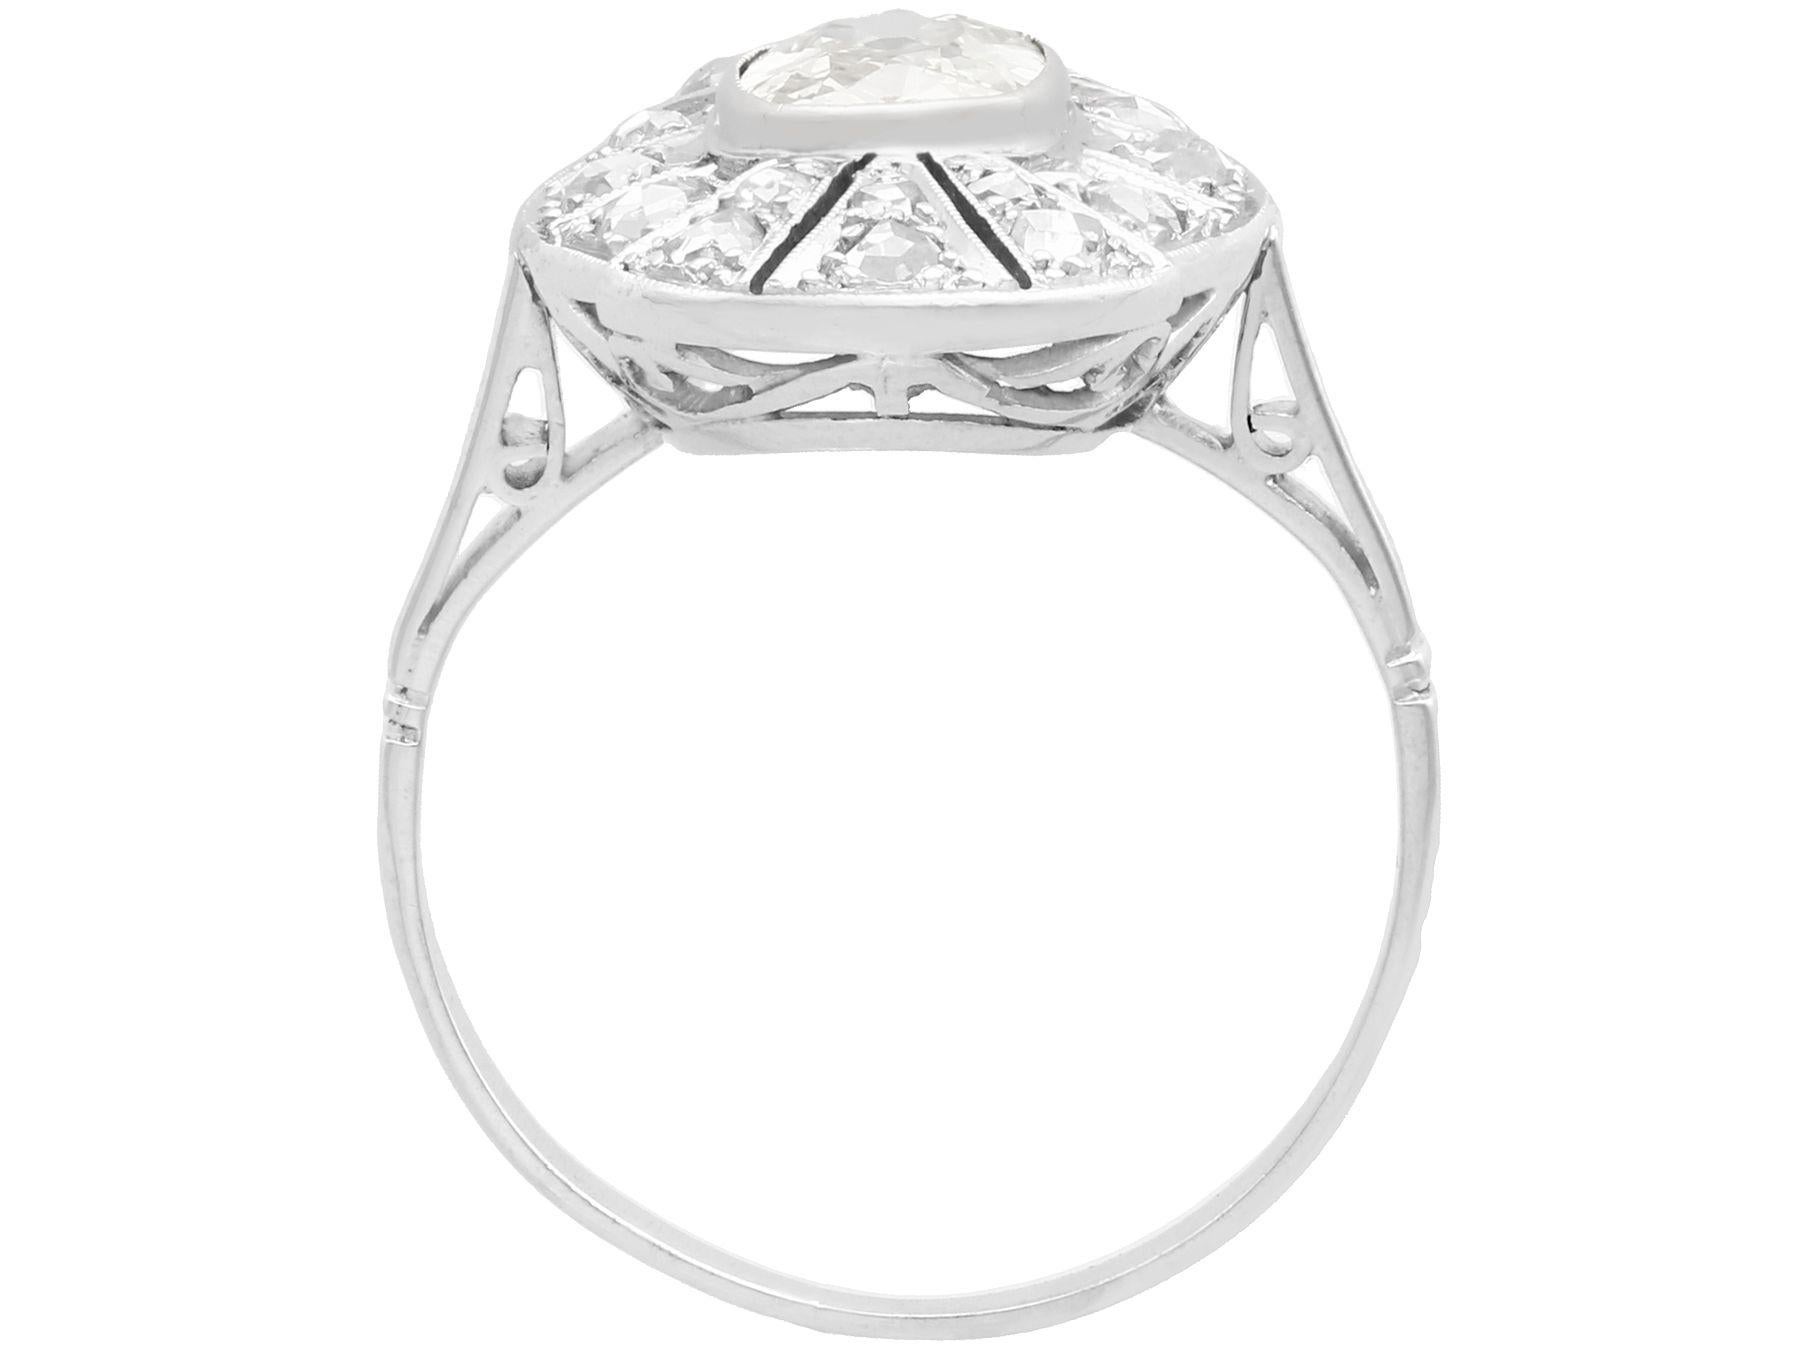 Women's or Men's Antique 1.79 Carat Diamond and White Gold Cocktail Ring, Circa 1930 For Sale